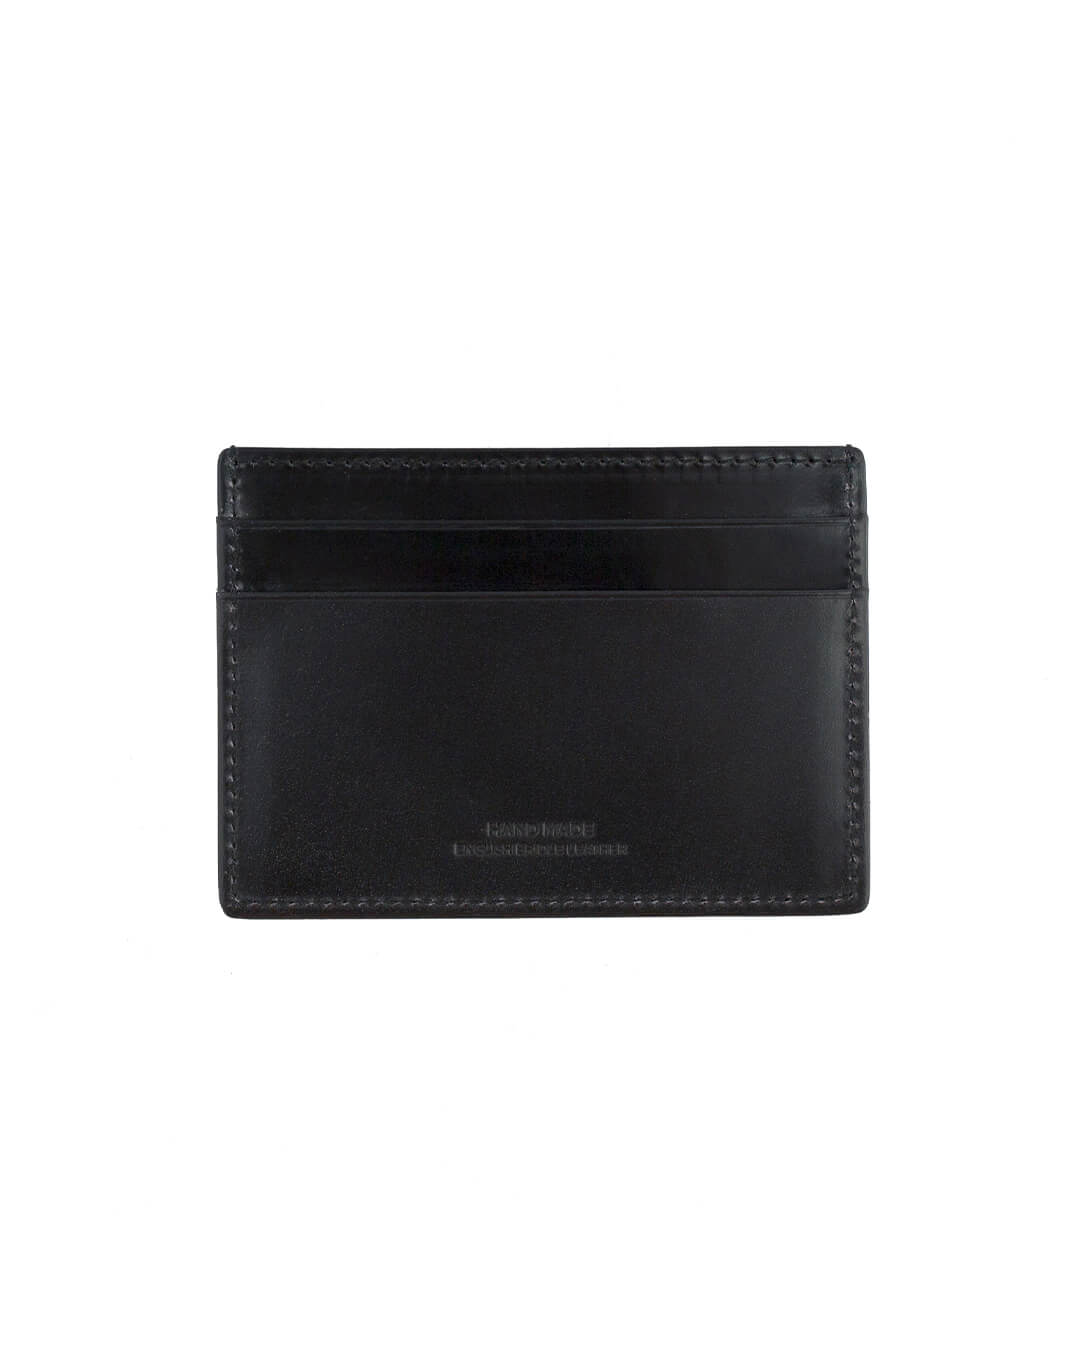 Cavesson's Wallets Cavesson's Black Card Case